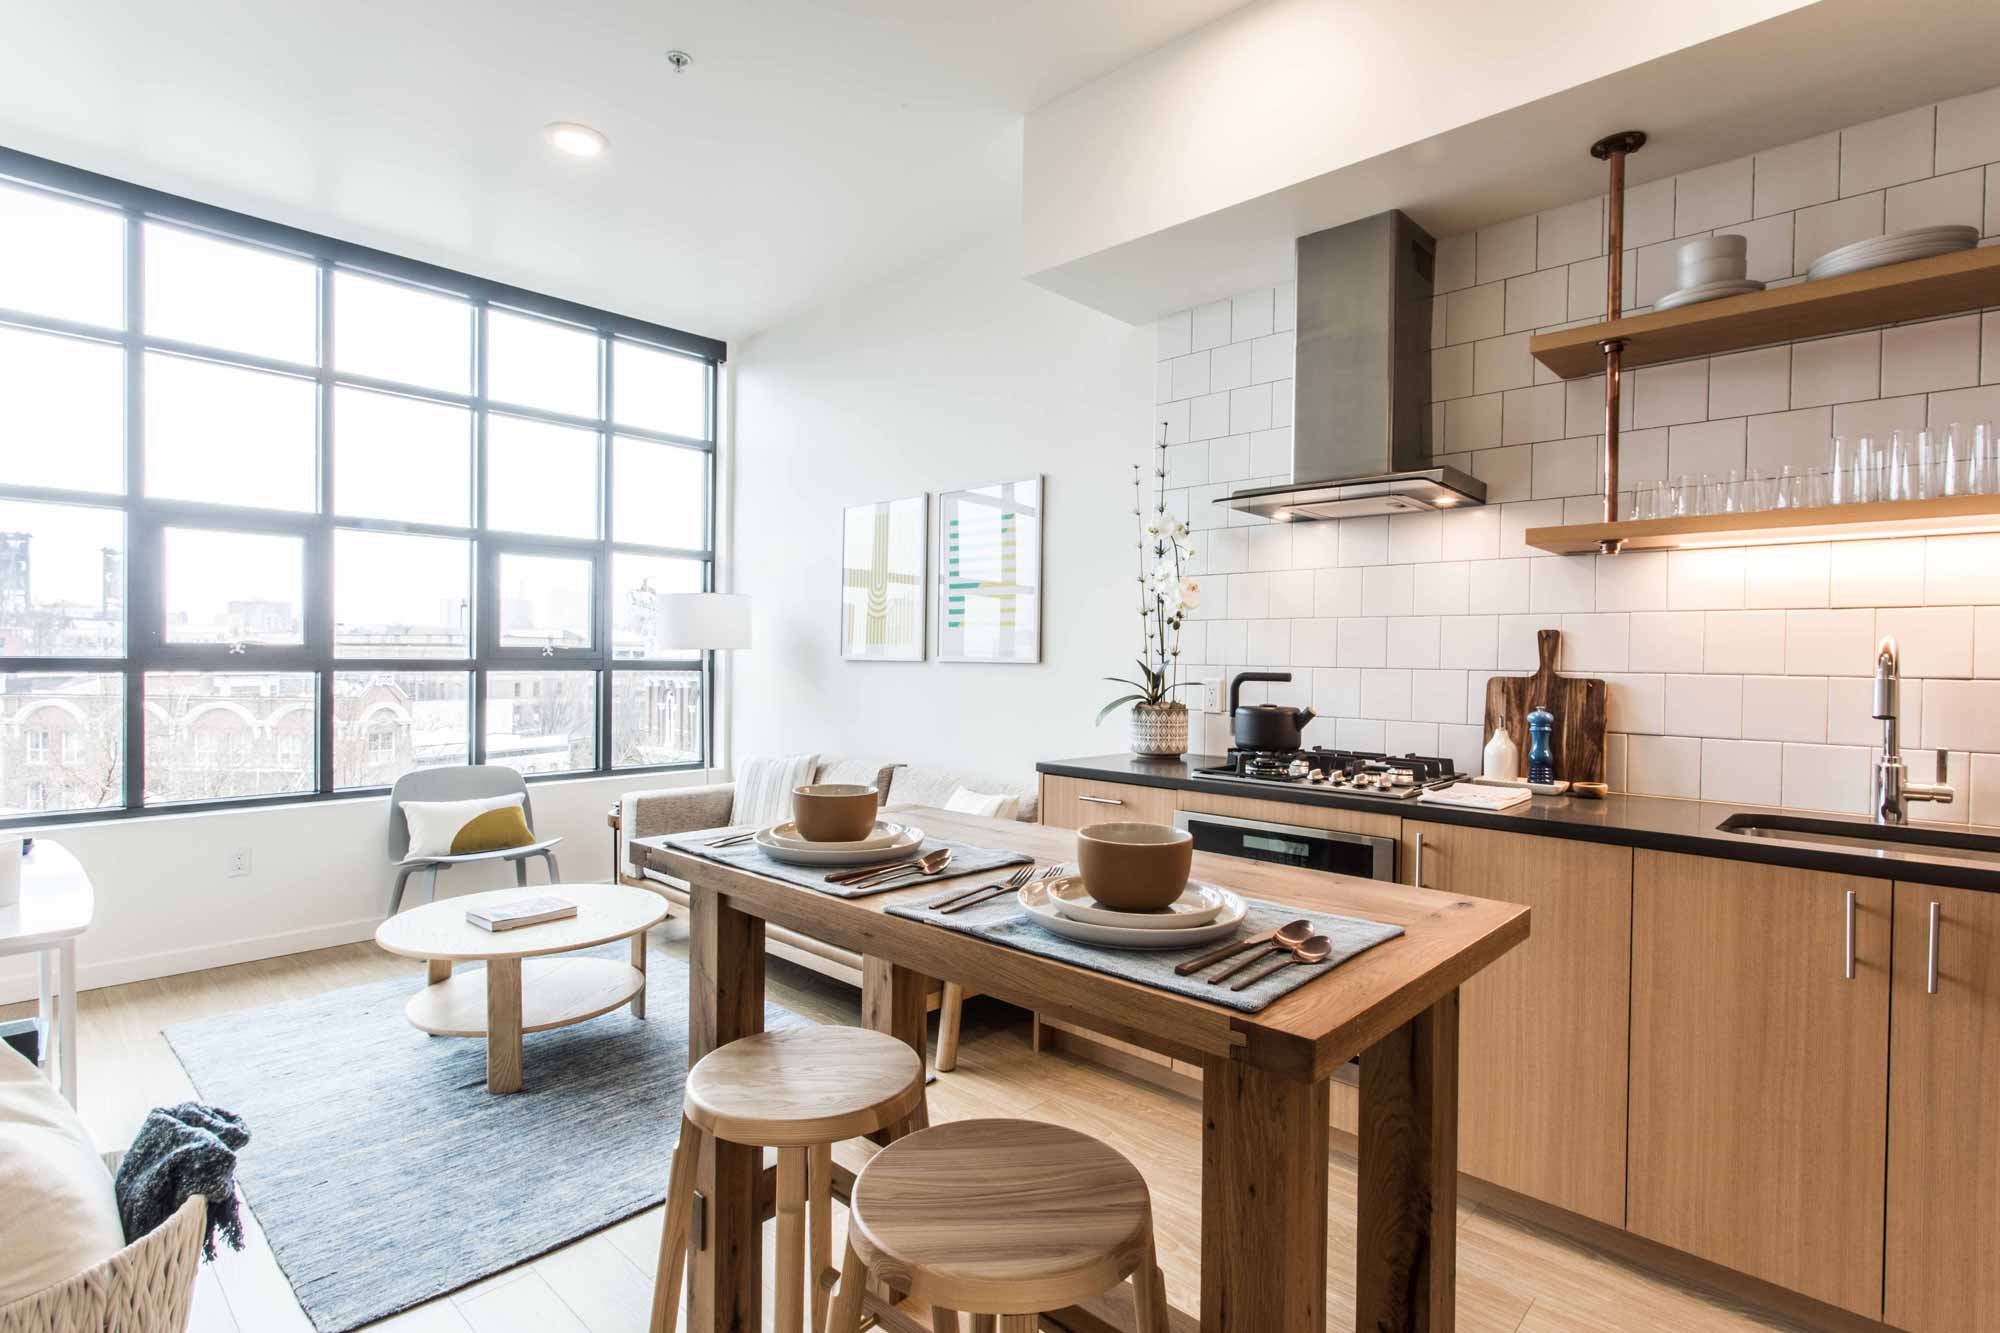 Contemporary kitchen design at 230 Ash luxury apartments in downtown Portland